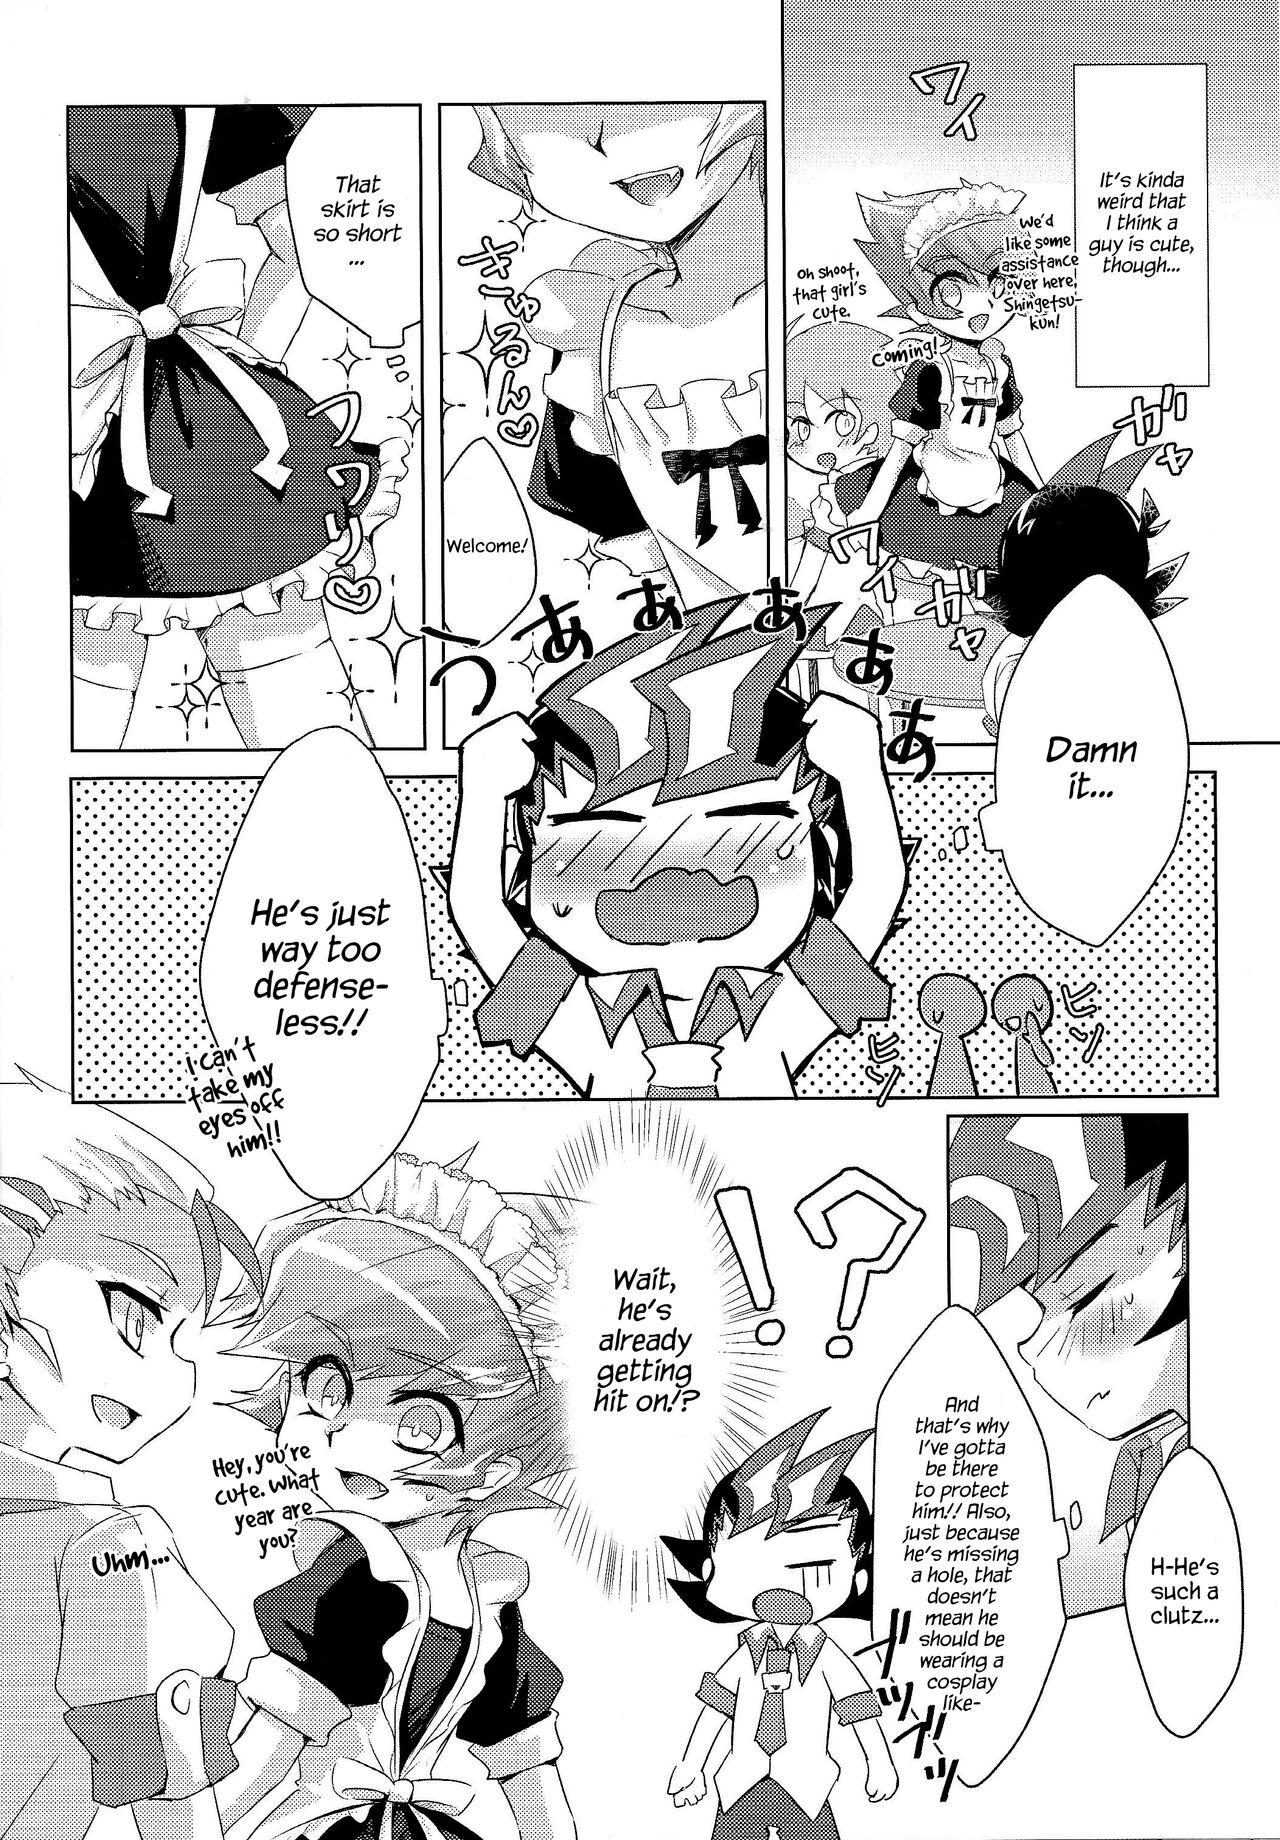 Mistress Stand by me - Yu gi oh zexal Slave - Page 5